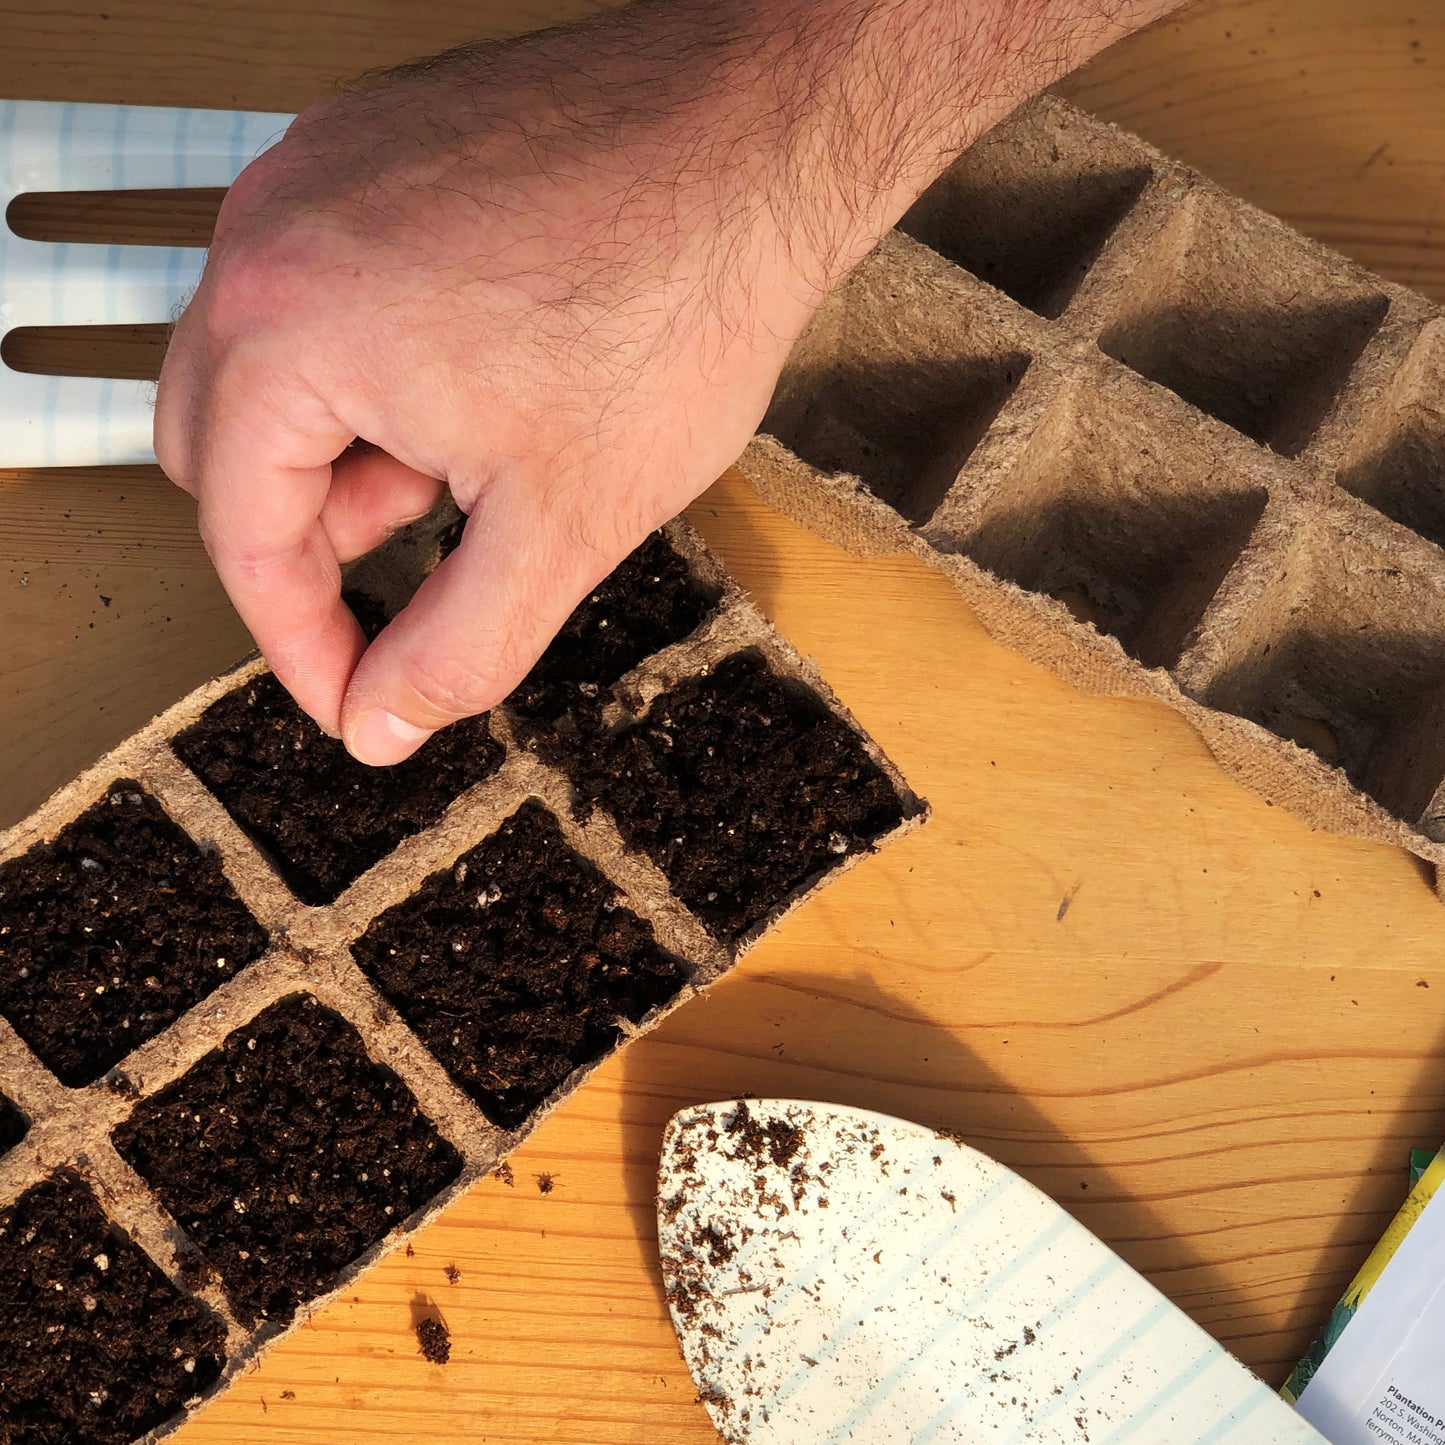 Start your Garden Sweet Burpless F1 Organic Cucumber seeds in biodegradable peat strip trays filled with sowing mix.